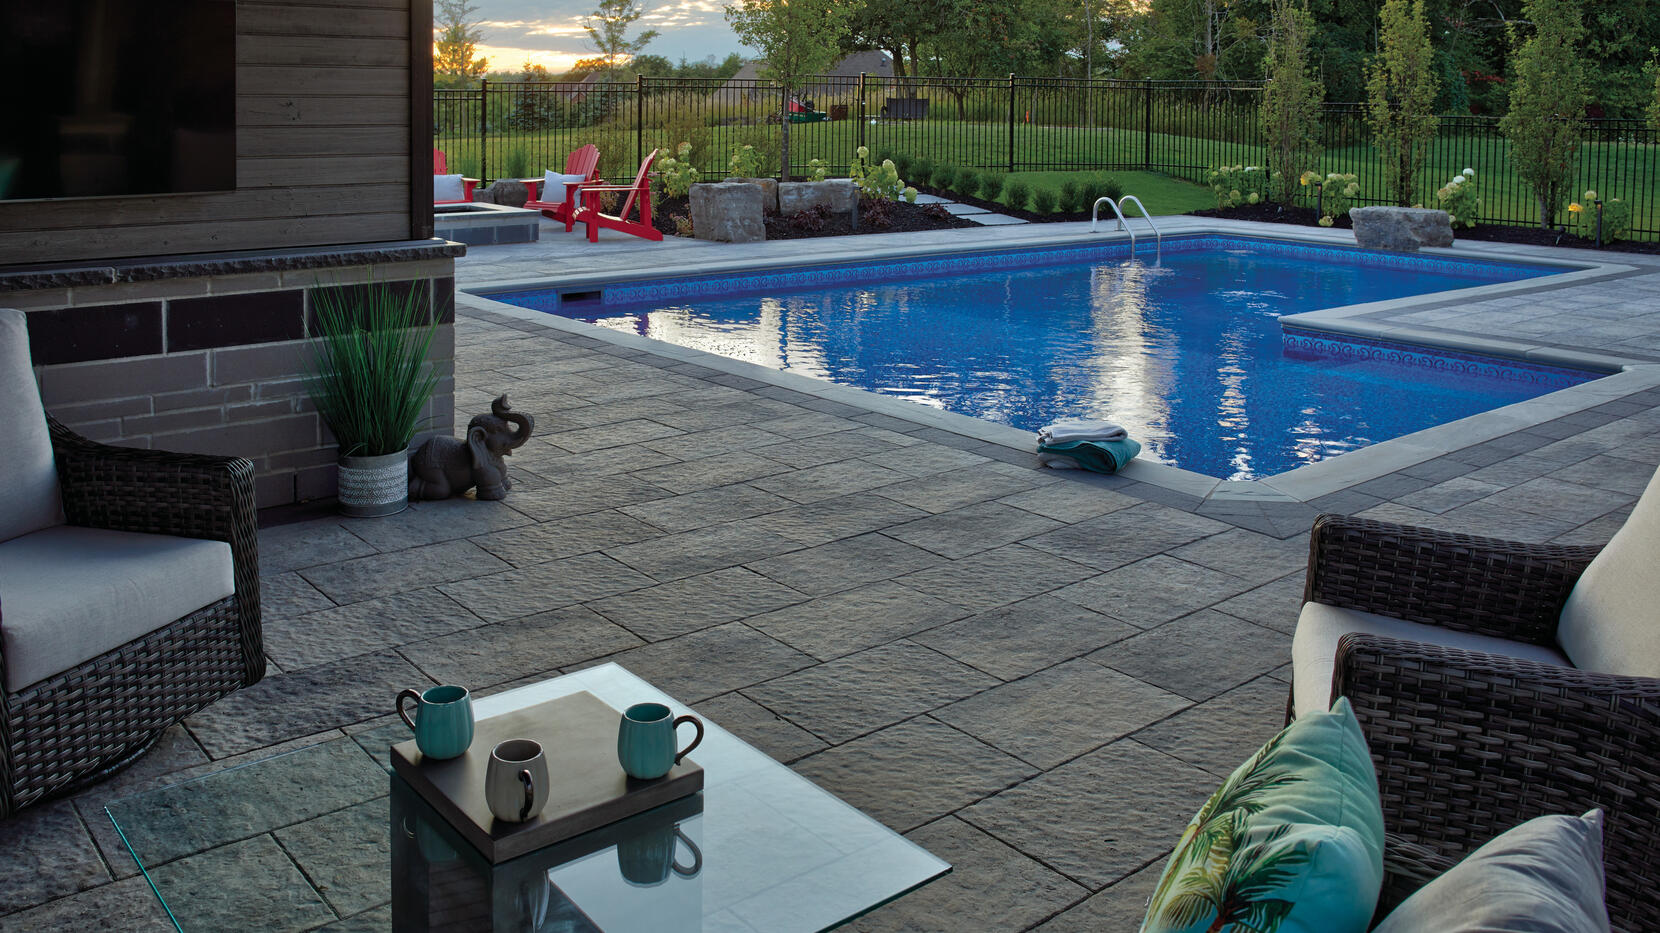 Modern pool deck using Rialto pavers by Oaks landscape products